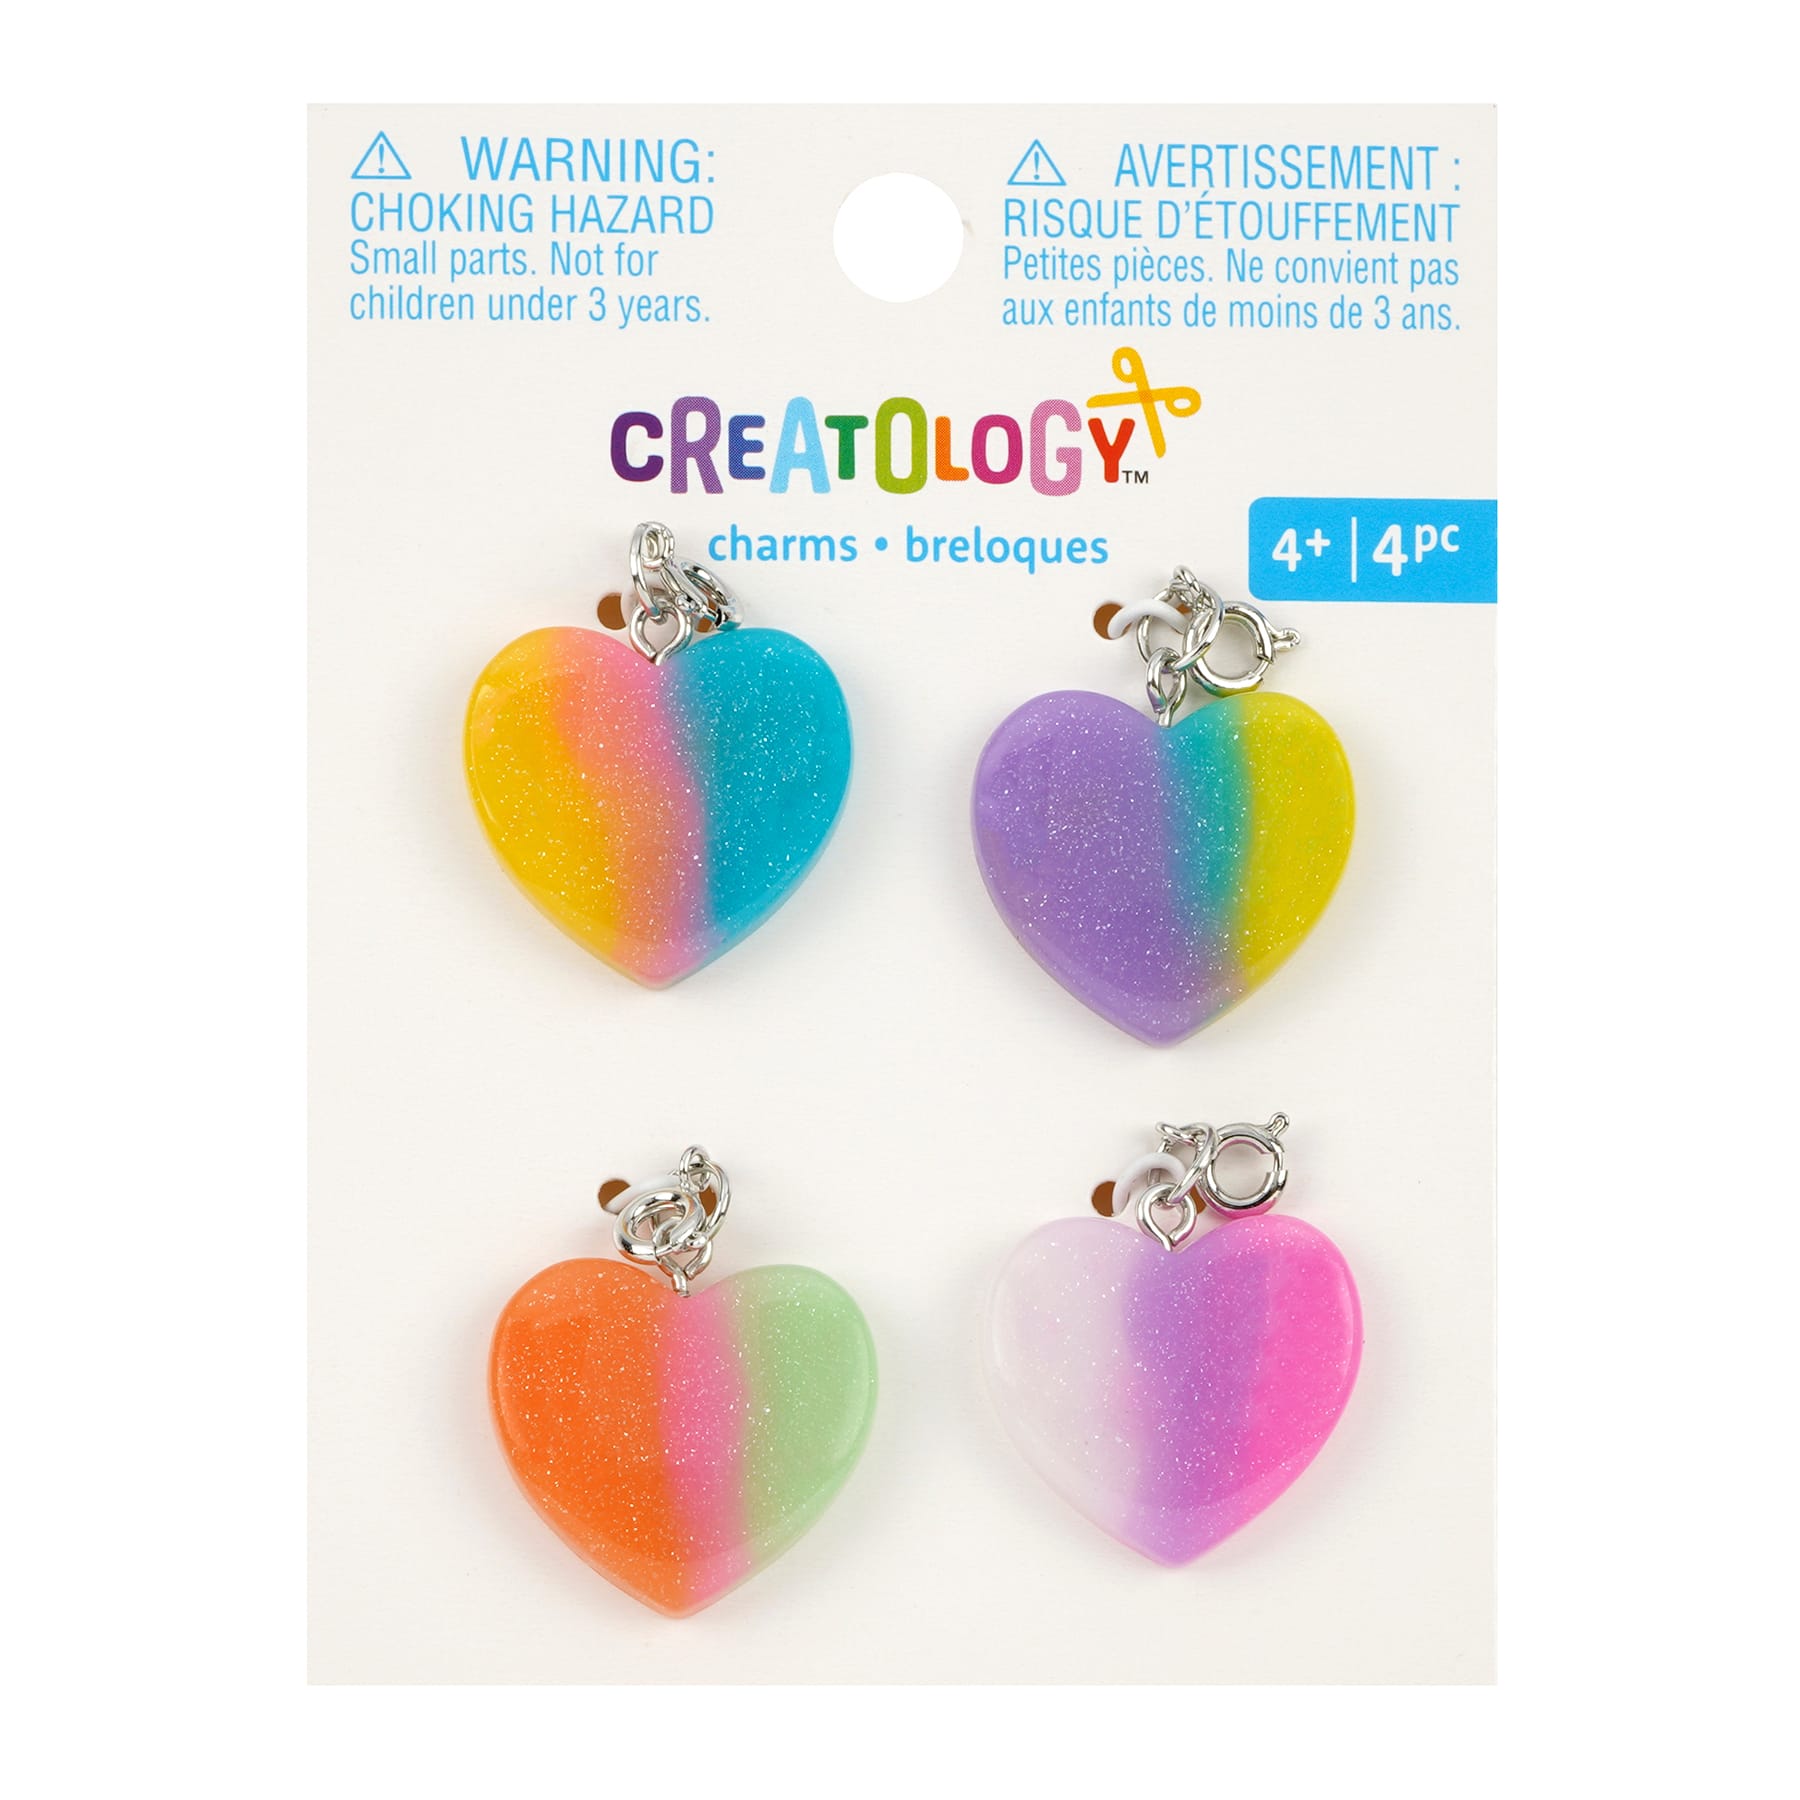 12 Packs: 3 ct. (36 total) Color Bottle Charms by Creatology™ 